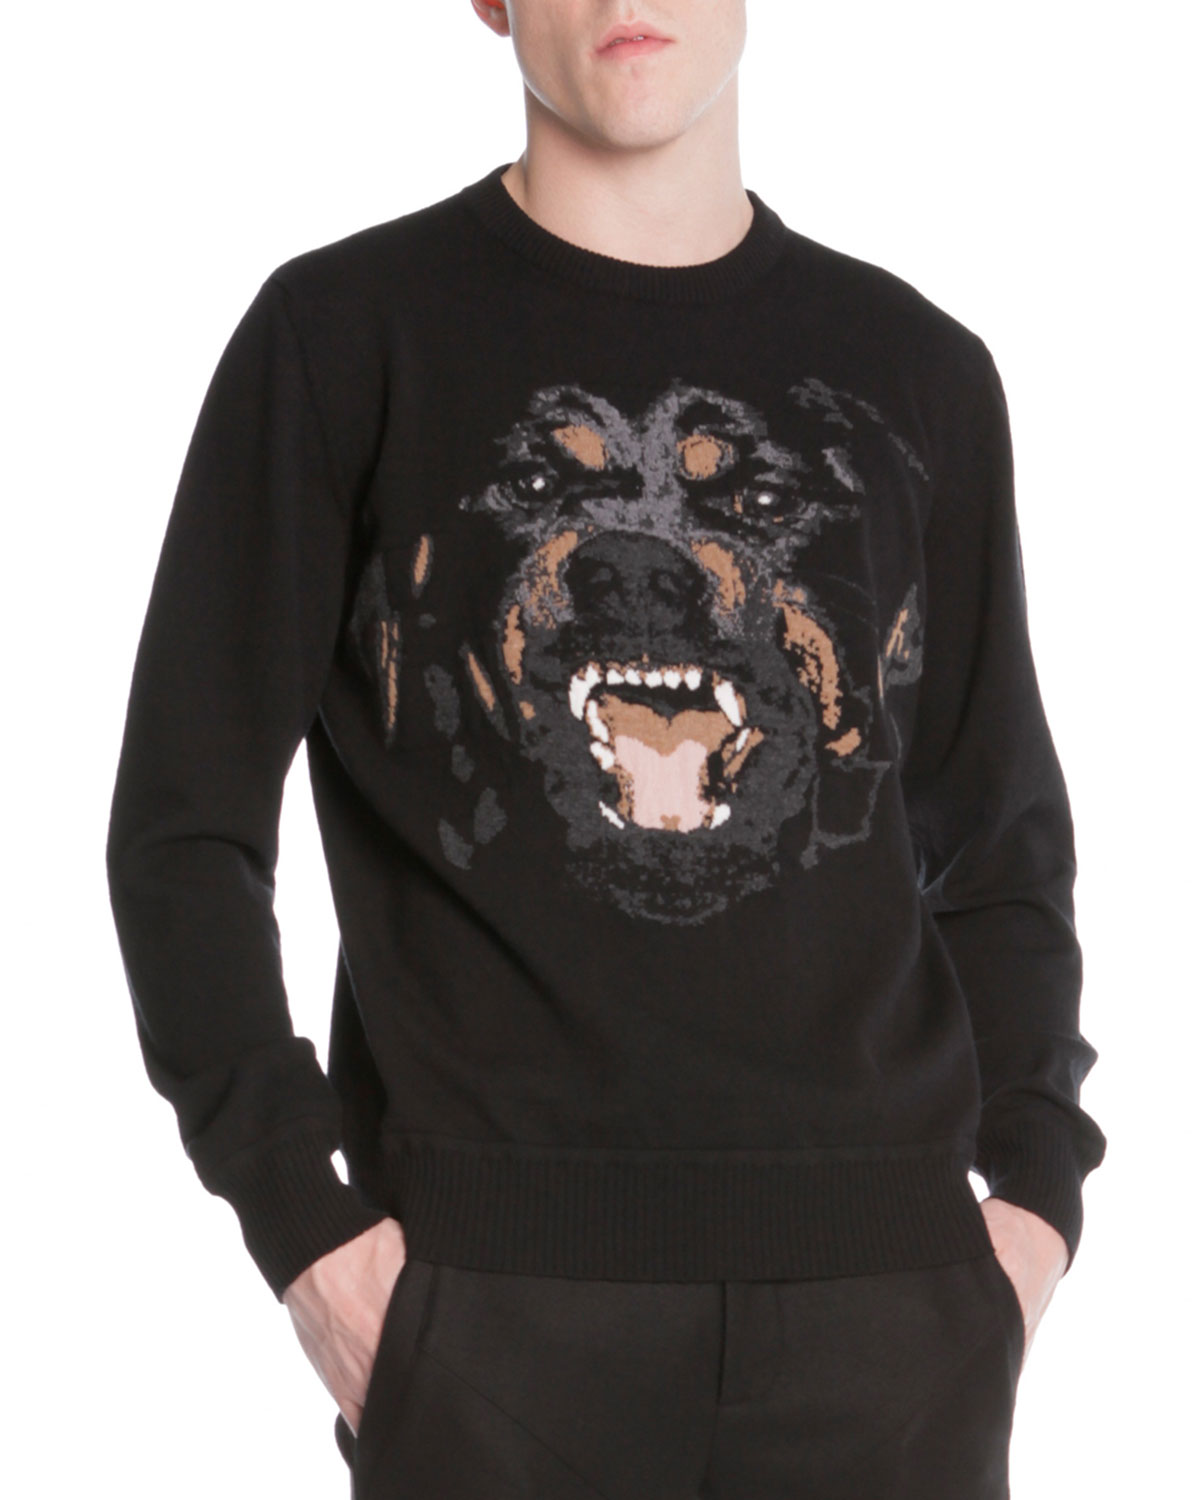 givenchy dog clothes